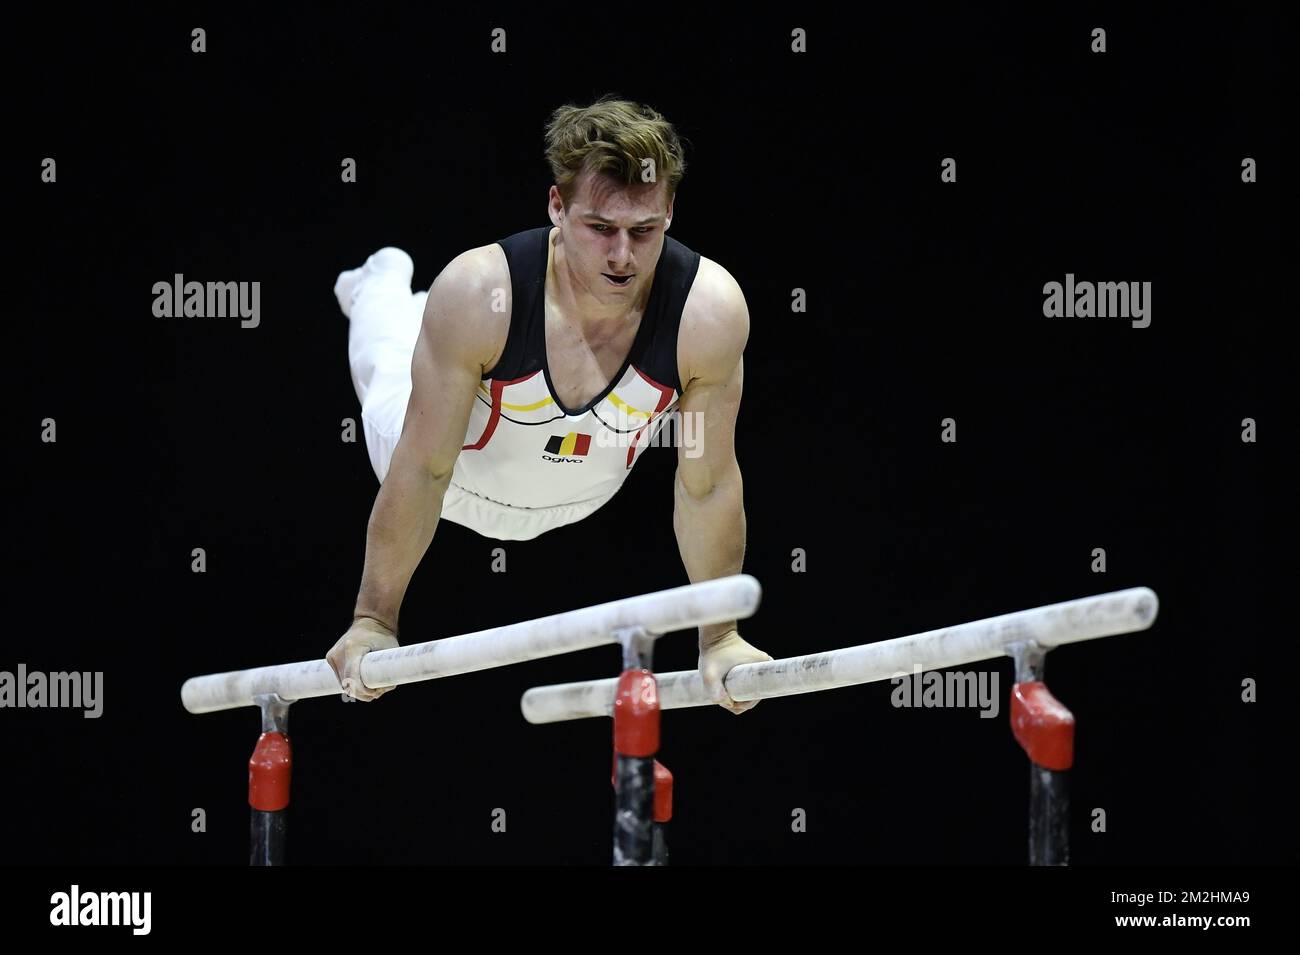 Luka Van Den Keybus pictured at the Parallel Bars Exercise the qualifications for the Senior Men's Team Final and Individual Apparatus artistic gymnastics event at the European Championships, in Glasgow, Scotland, Thursday 09 August 2018. European championships of several sports will be held in Glasgow from 03 to 12 August. BELGA PHOTO ERIC LALMAND  Stock Photo